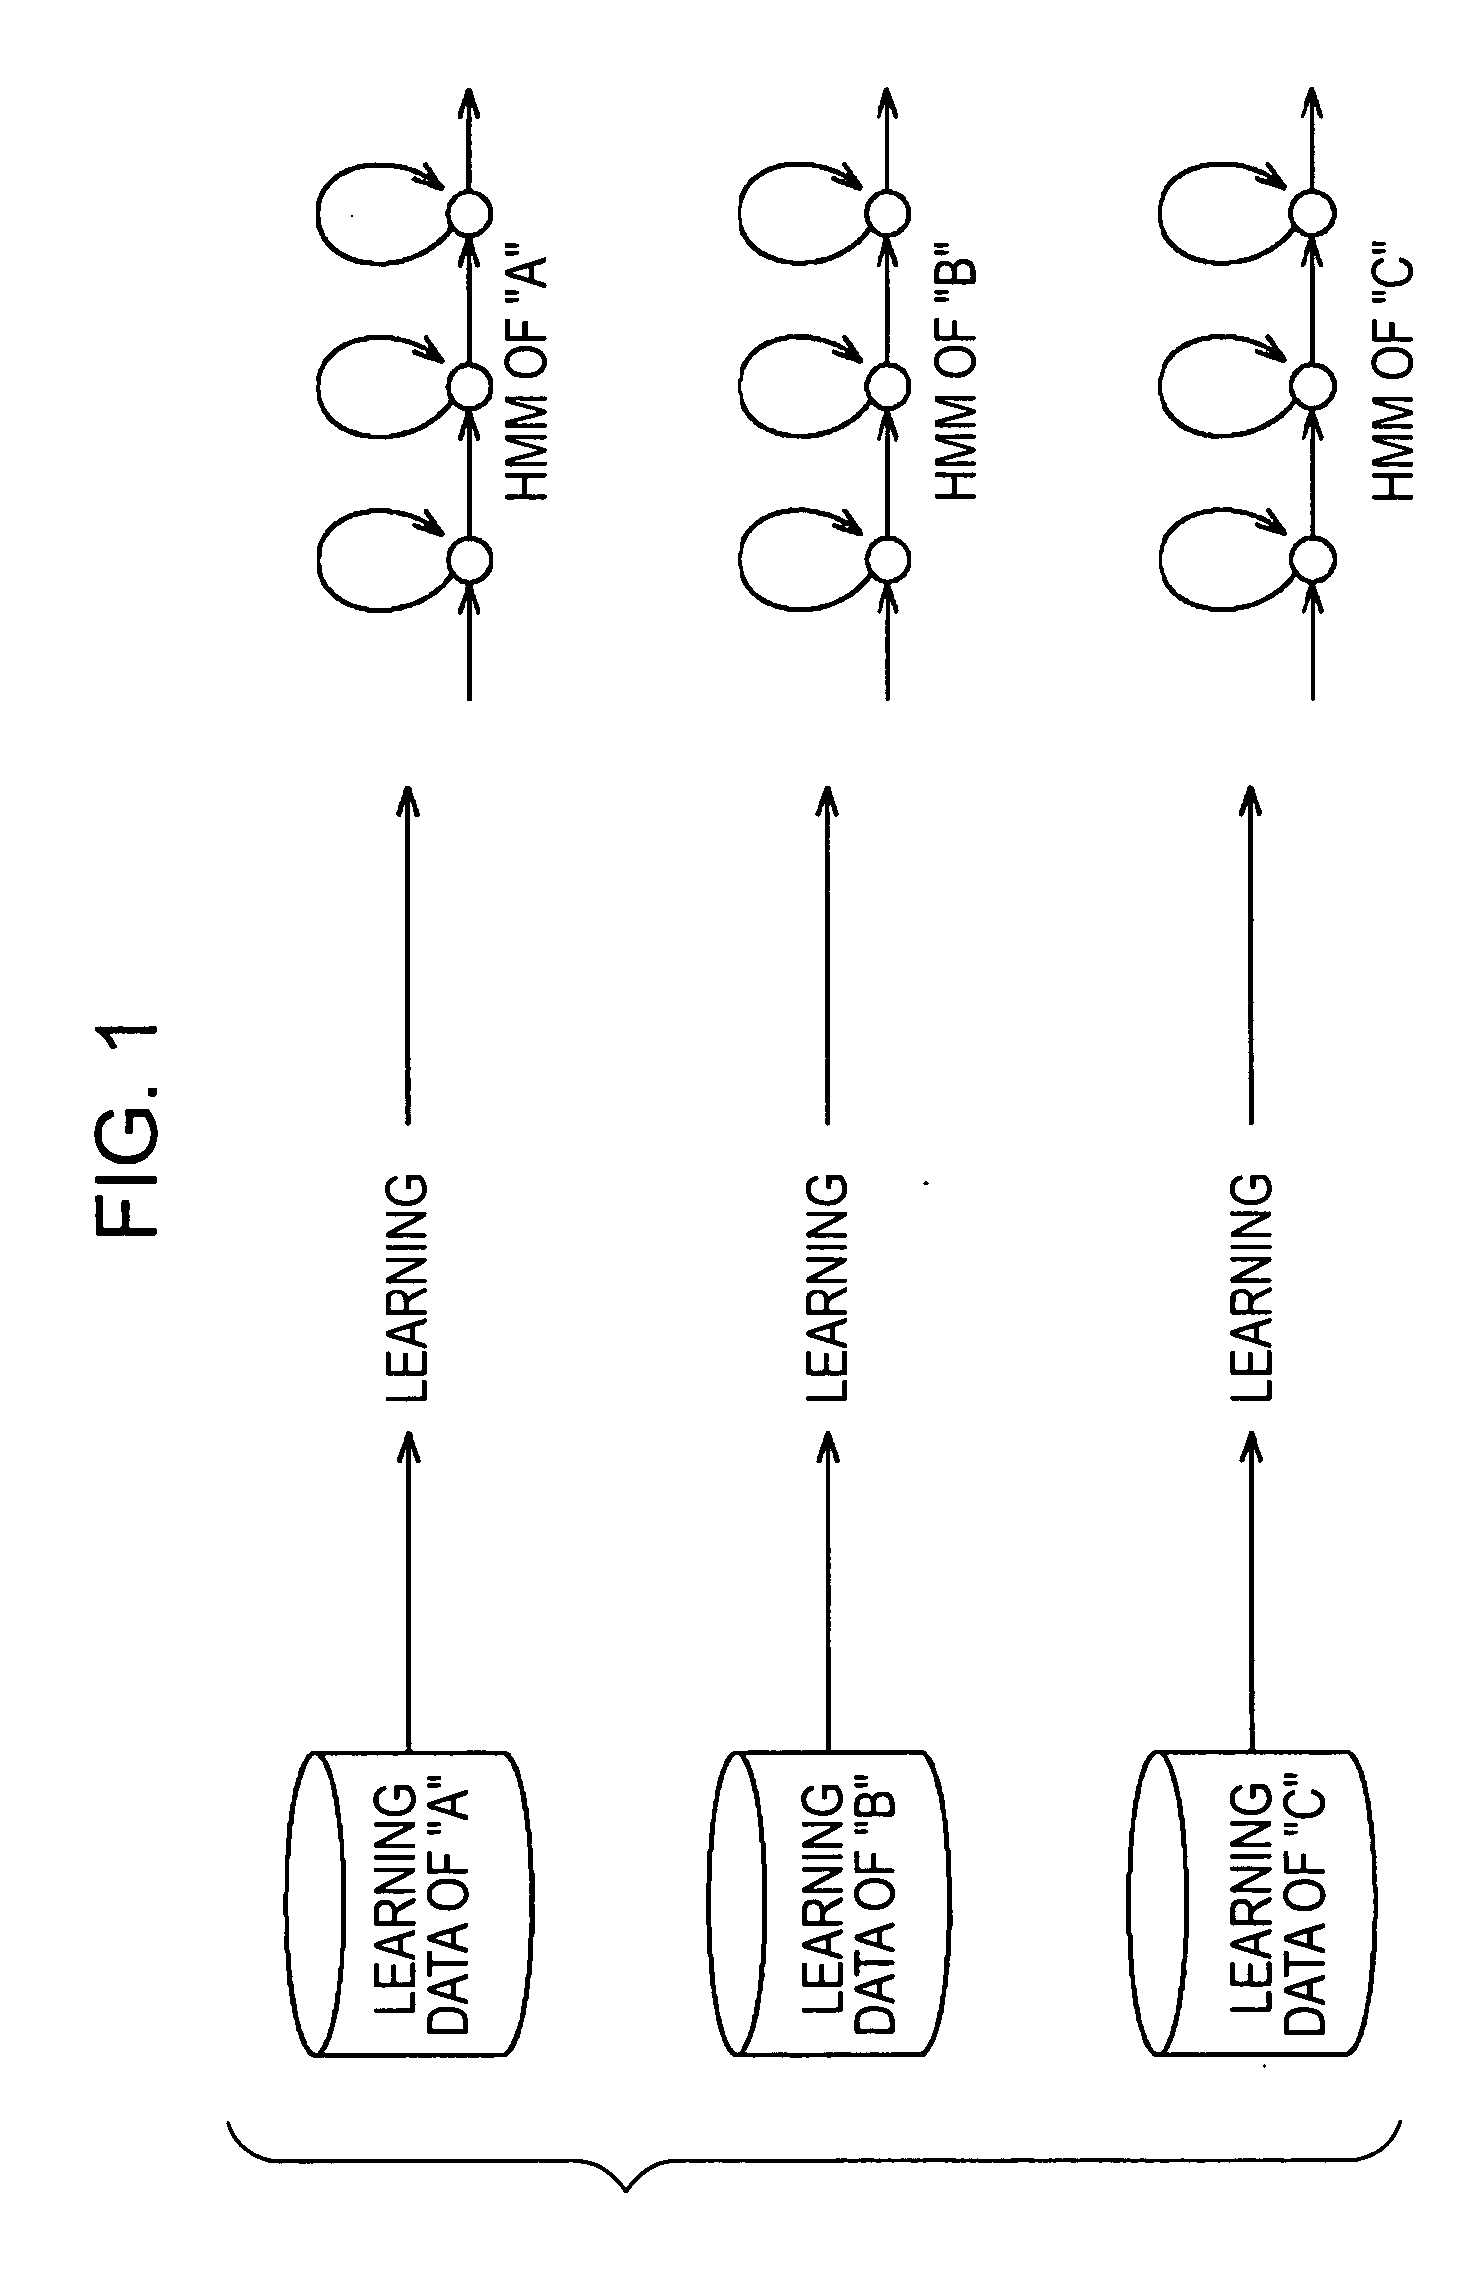 Method and apparatus for learning data, method and apparatus for recognizing data, method and apparatus for generating data, and computer program